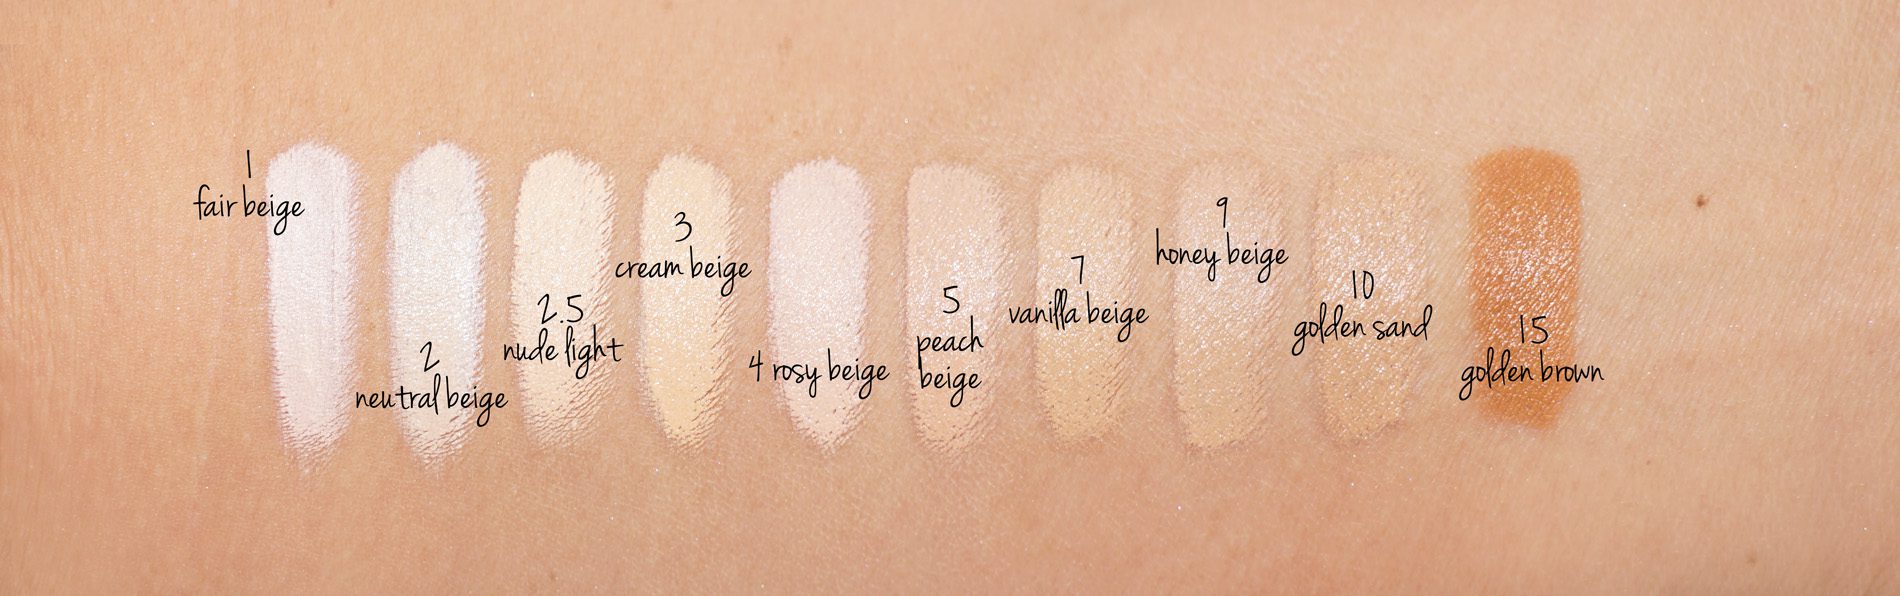 https://thebeautylookbook.com/wp-content/uploads/2018/08/By-Terry-Nude-Expert-Foundation-Stick-Swatches.jpg